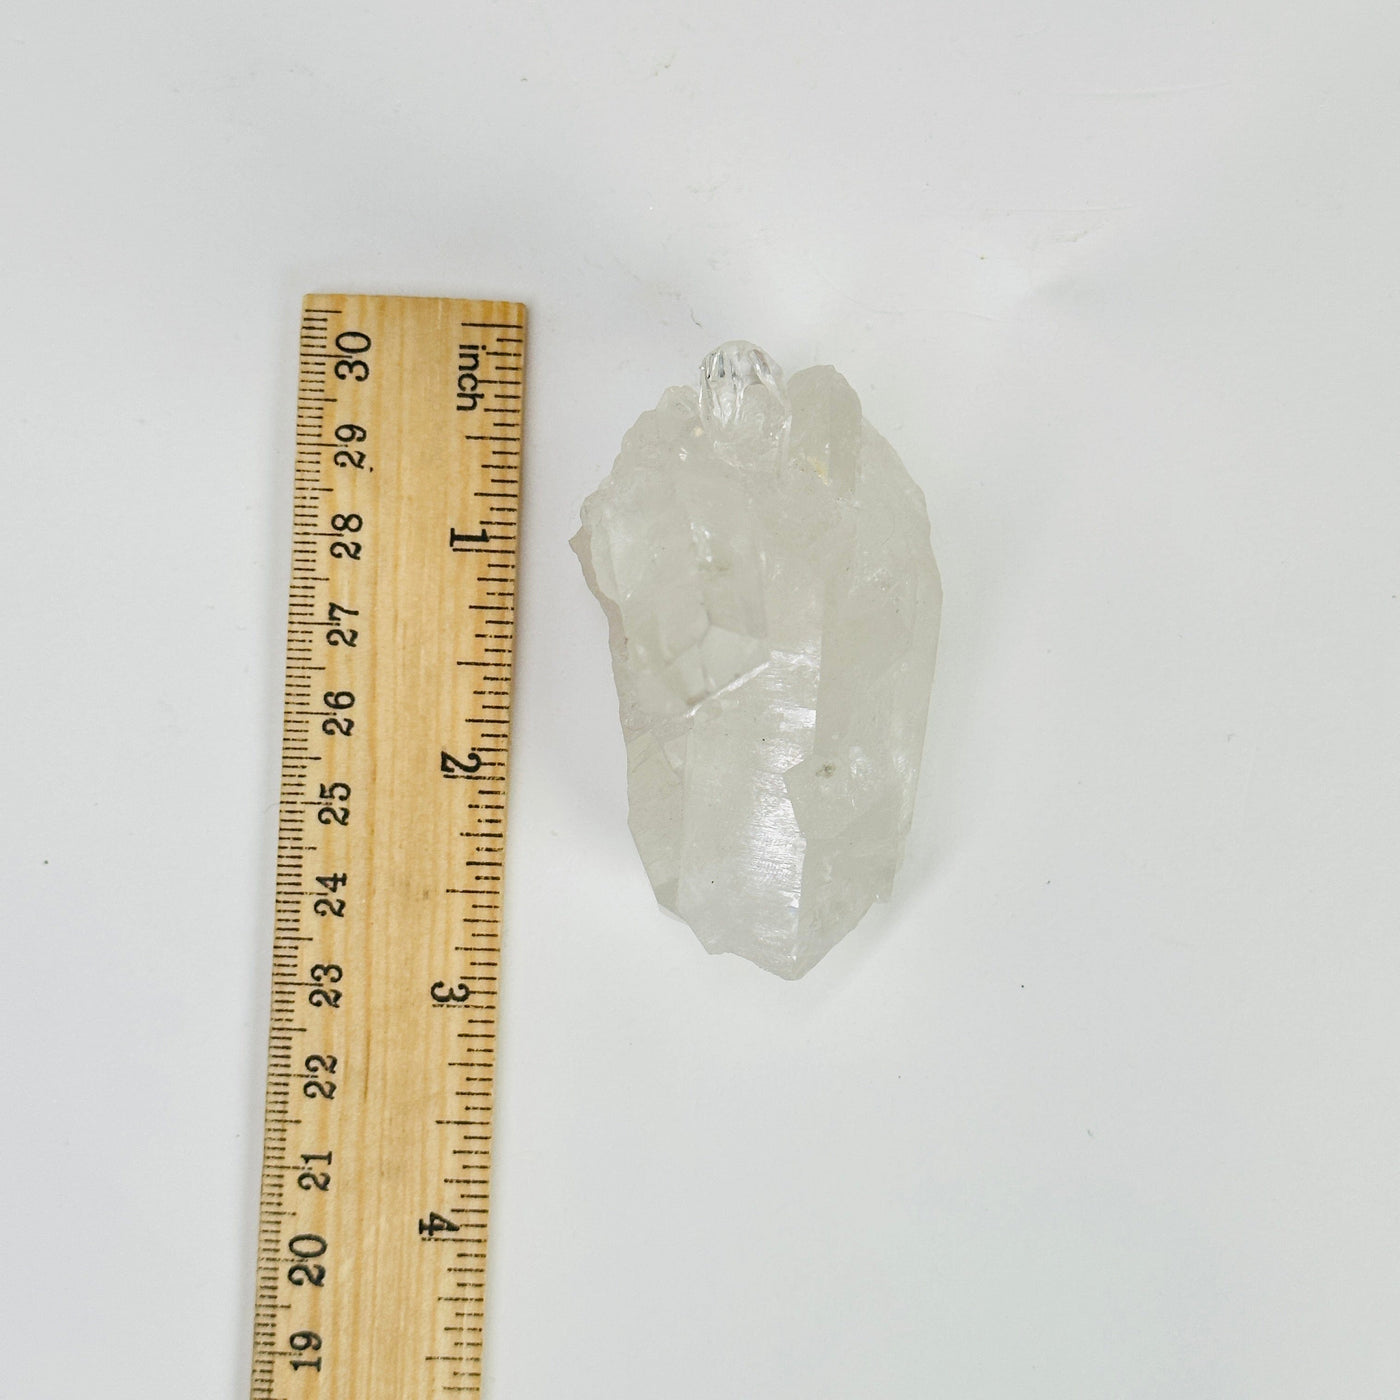 crystal quartz cluster next to a ruler for size reference